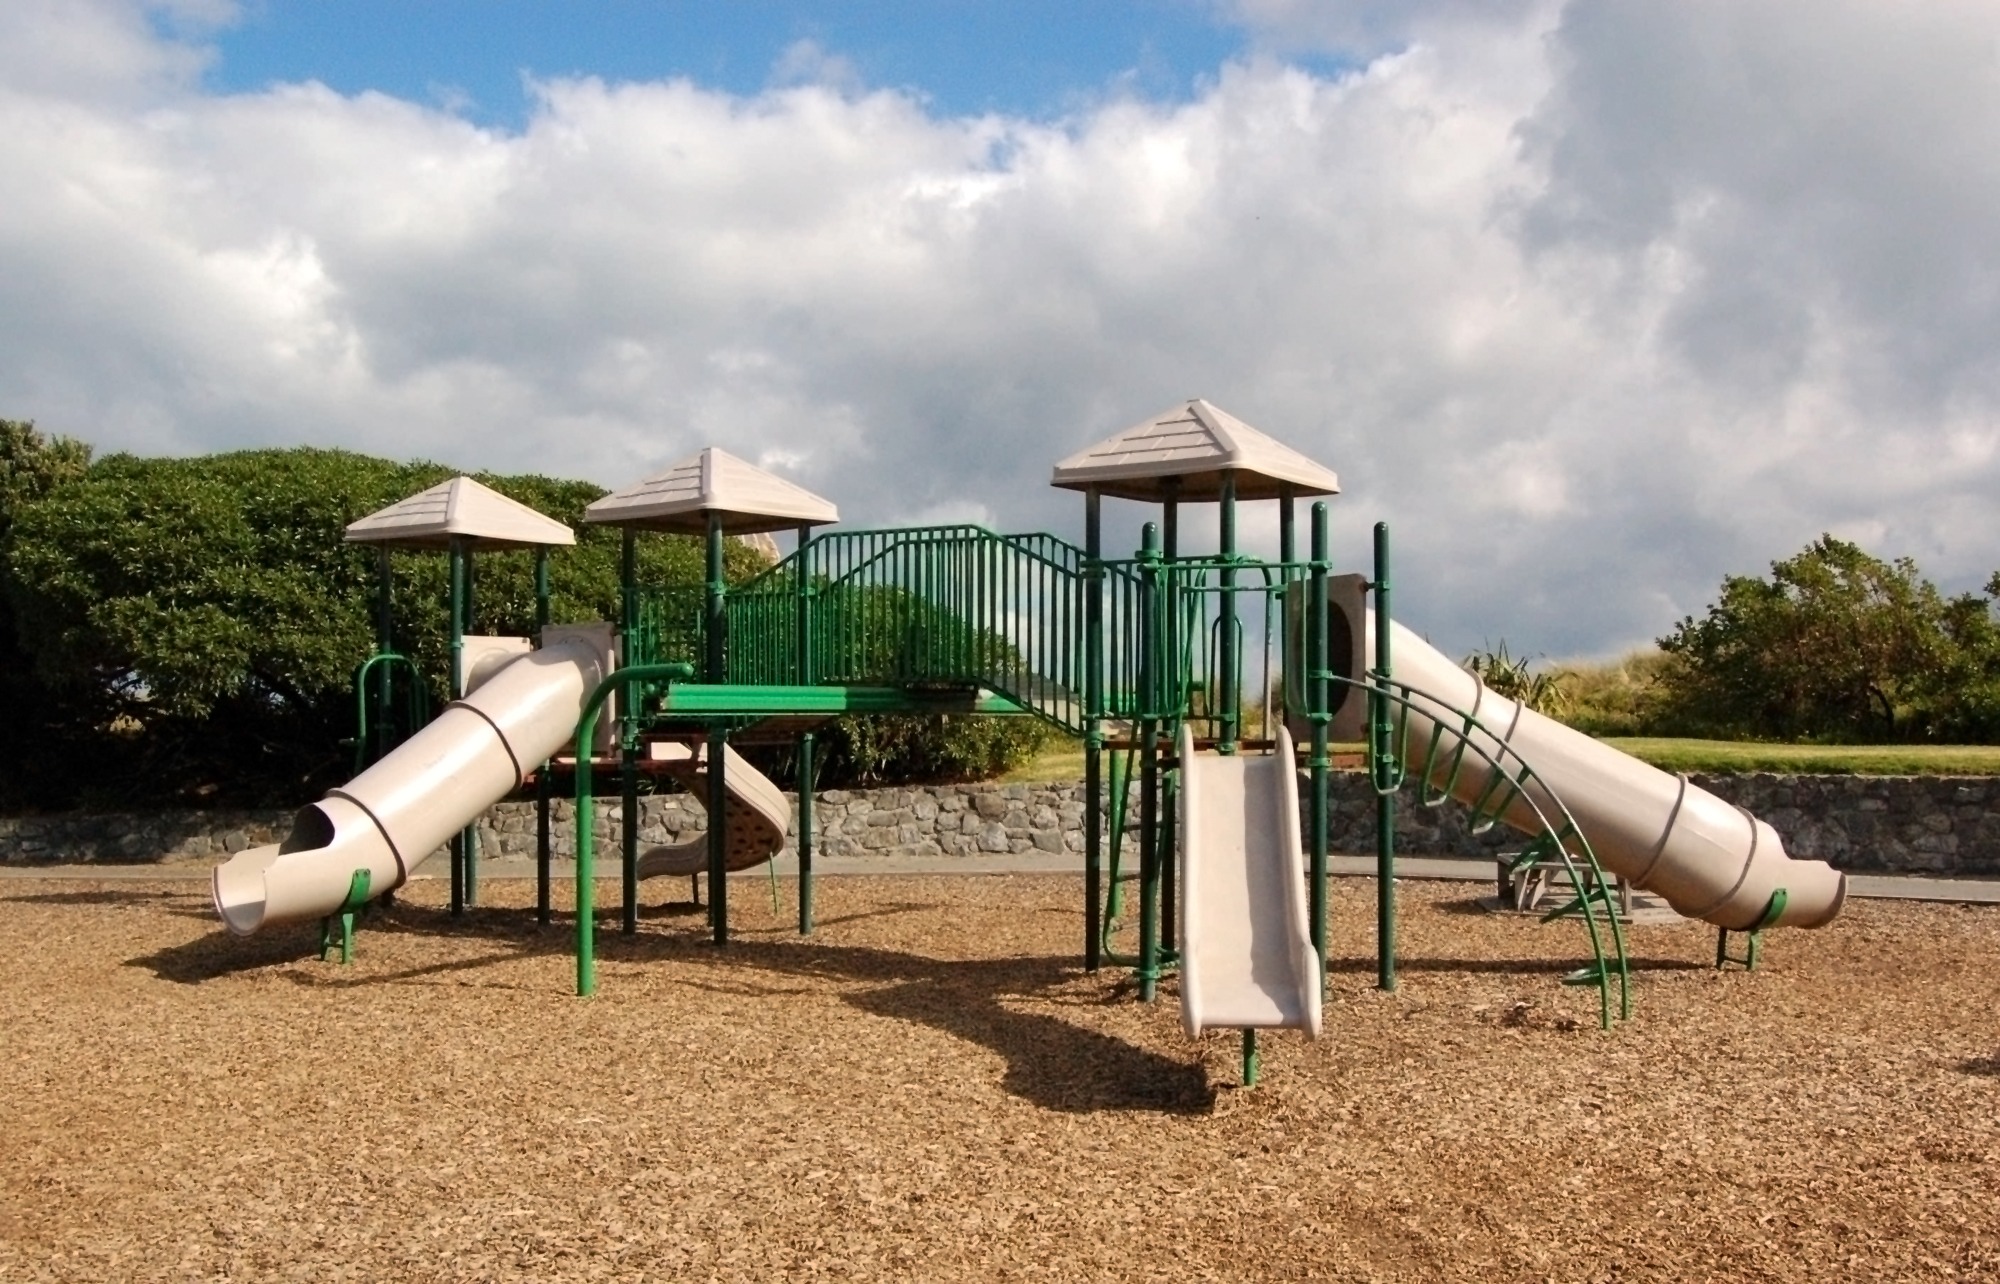 Best Playground Ground Cover Options, Playground Filler Material